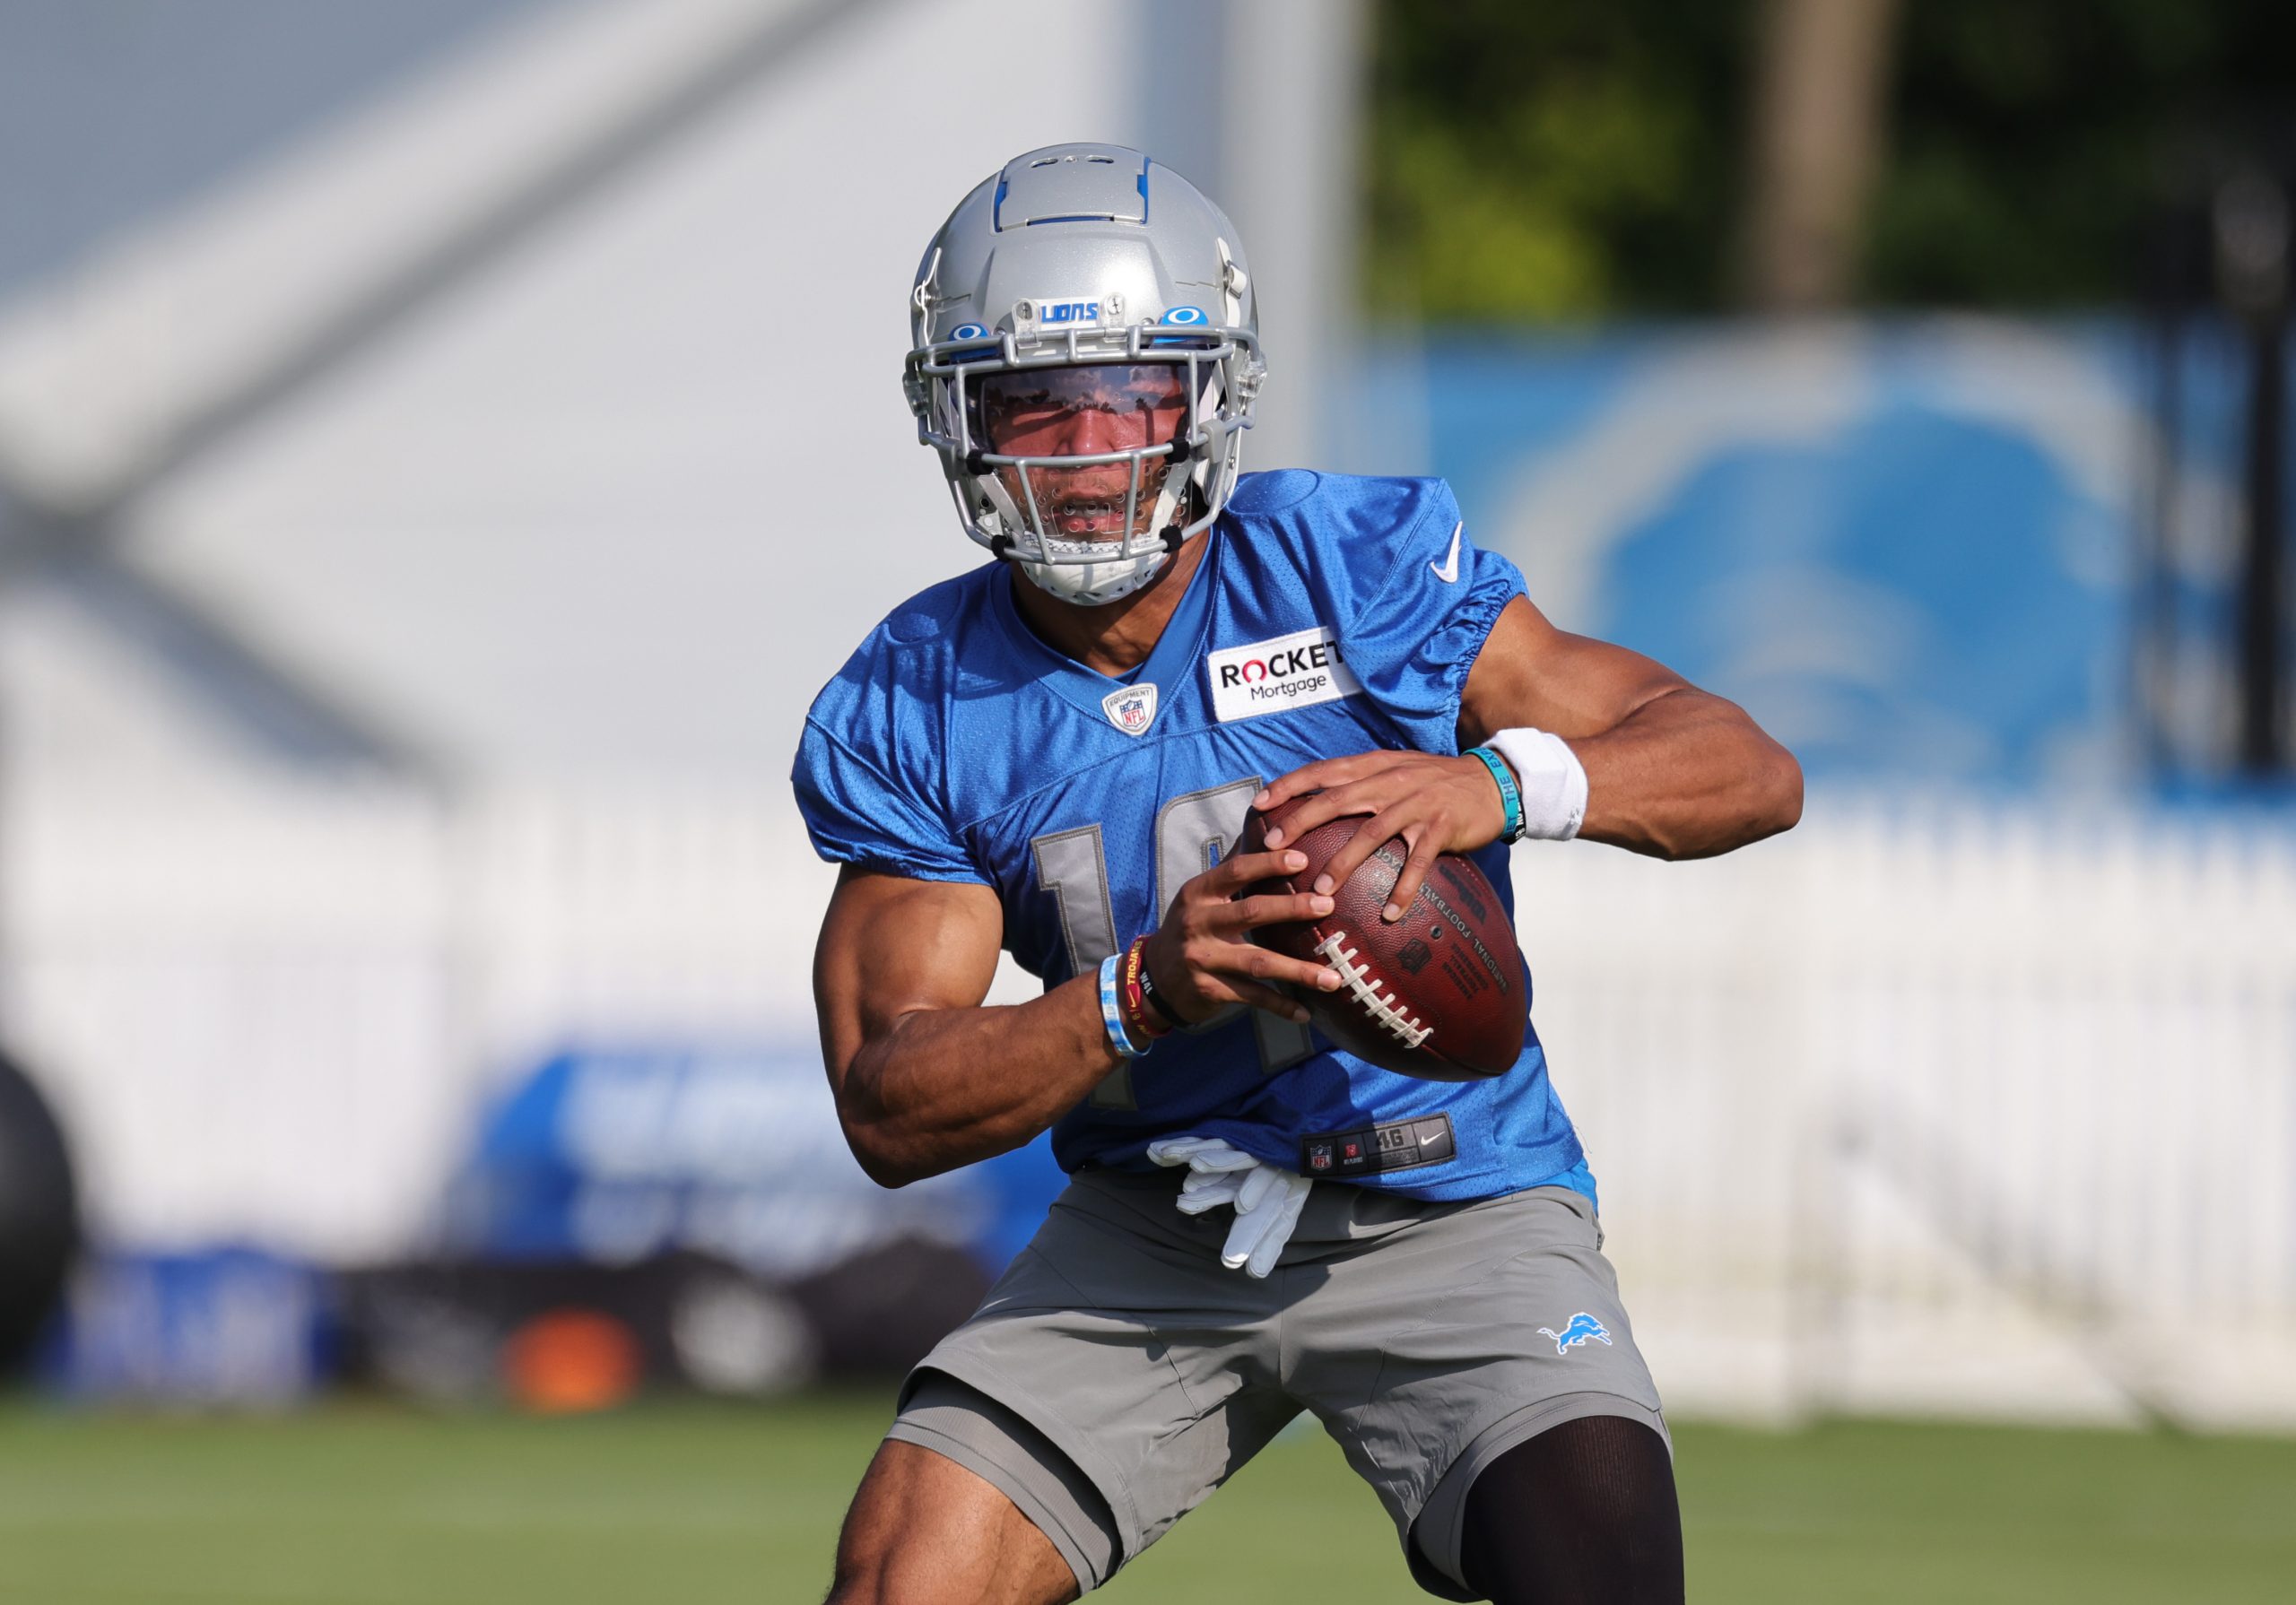 Lions’ Rookie Wide Receiver Amon-Ra St. Brown is Part of the Most Interesting Family in Football